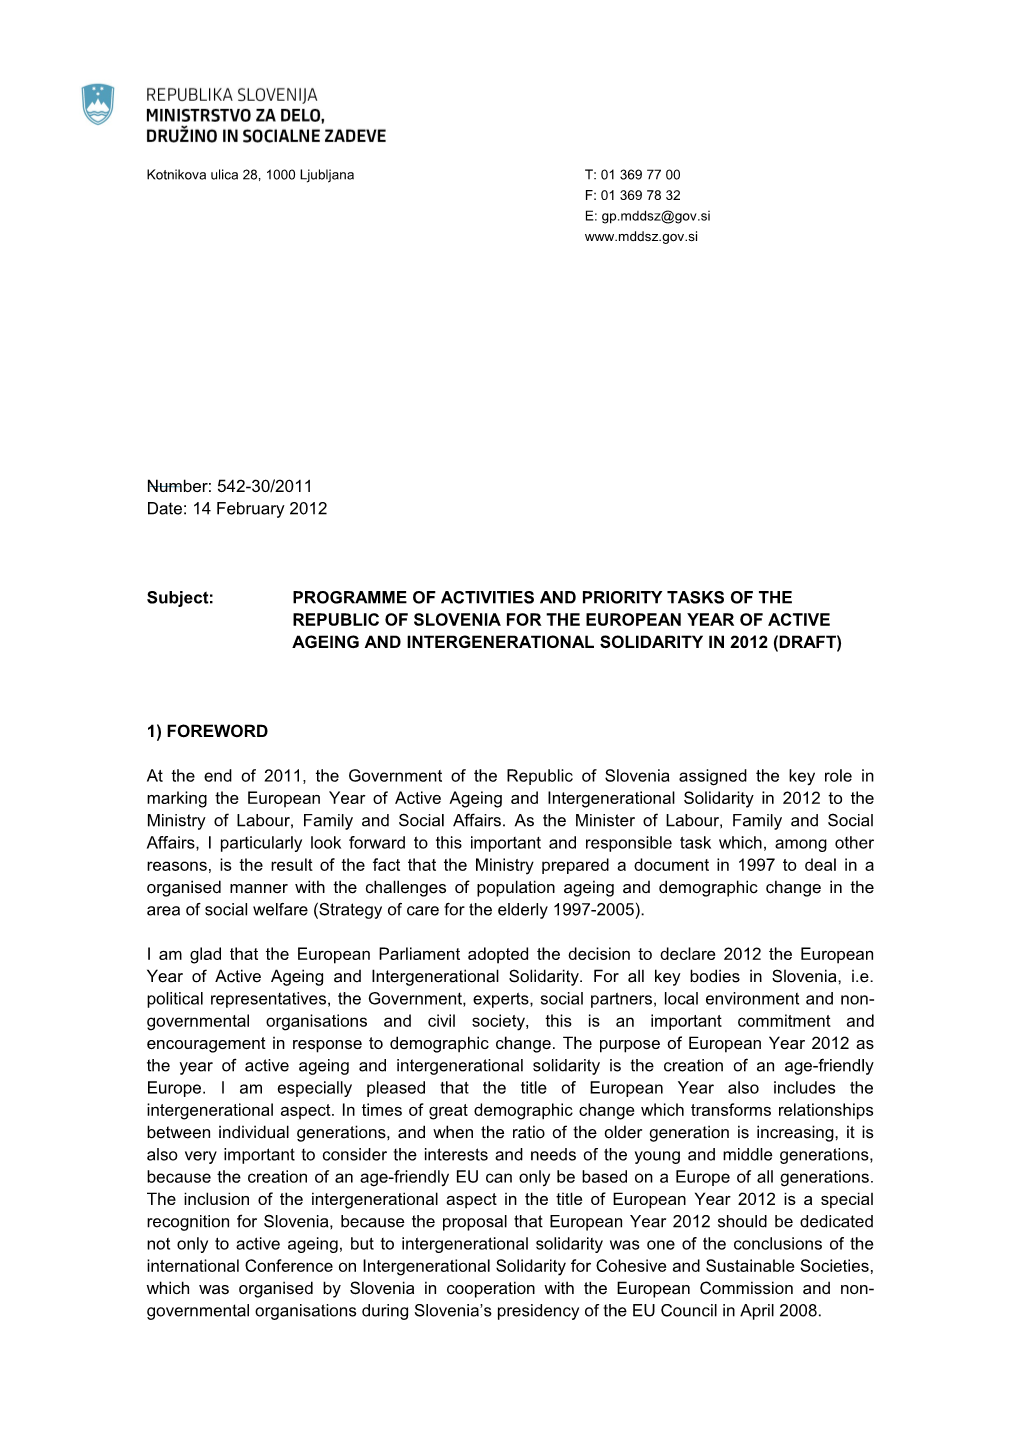 Subject: PROGRAMME of ACTIVITIES and PRIORITY TASKS of the REPUBLIC of SLOVENIA for THE